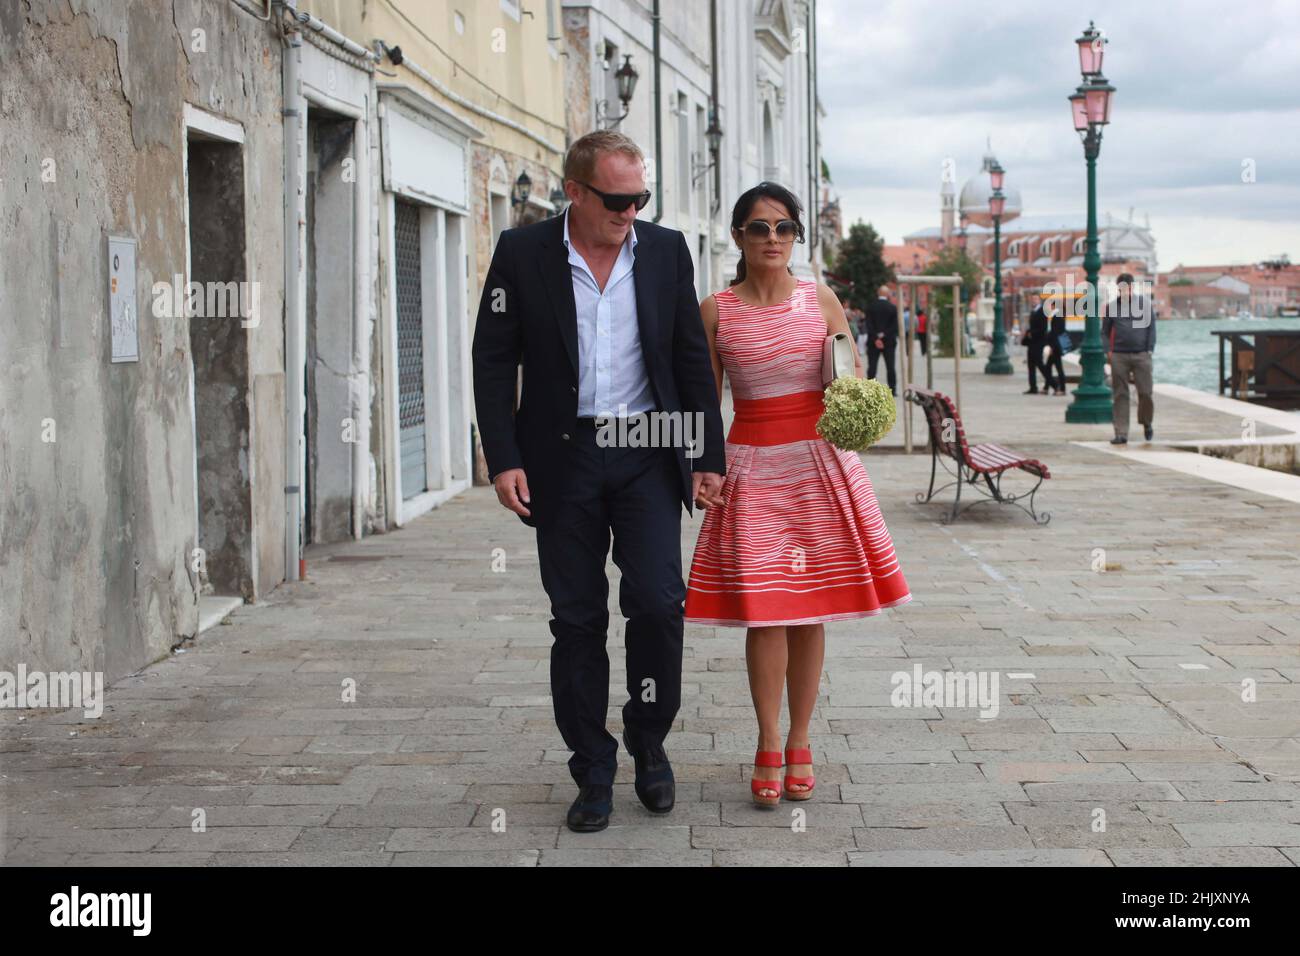 Salma Hayek and her husband Francois-Henri Pinault walk hand in hand while out in Venice, Italy, September 1 2012 Stock Photo